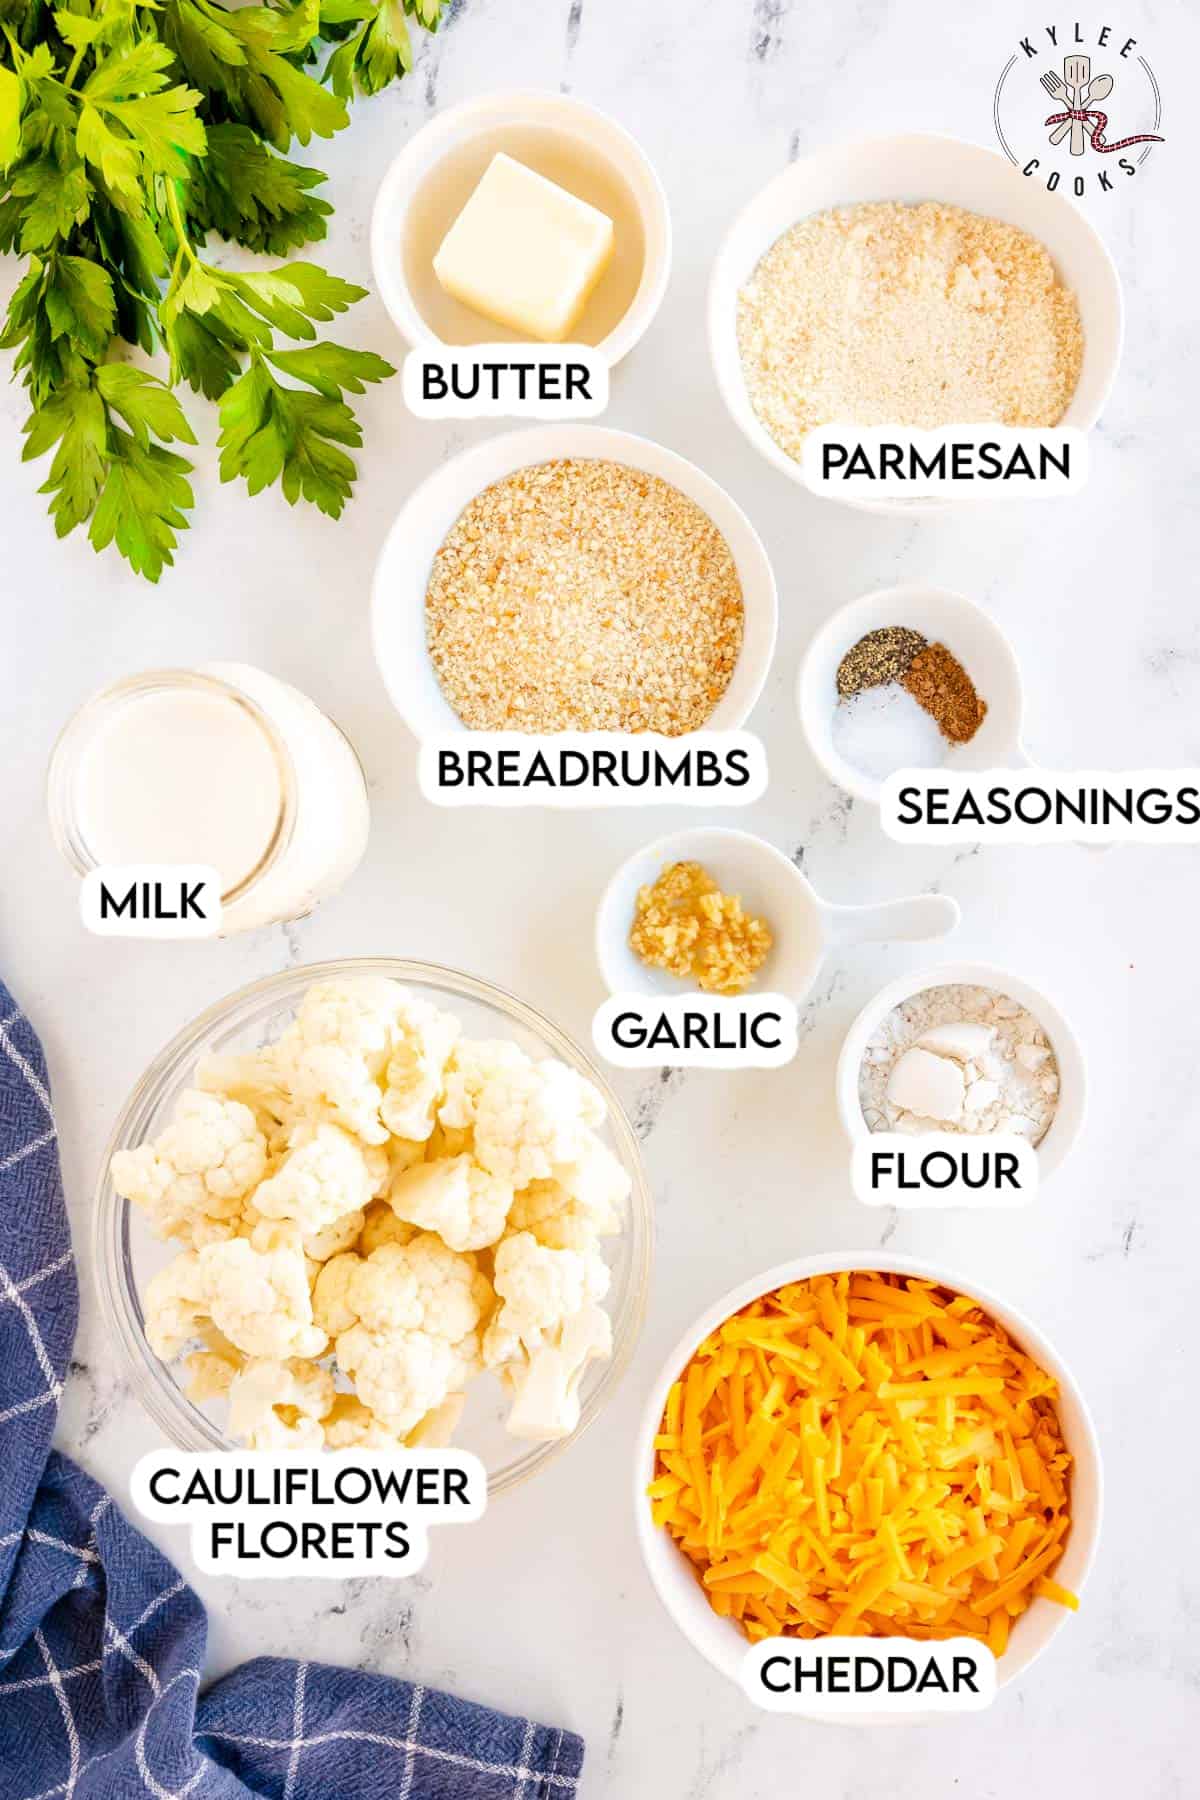 ingredients to make cauliflower au gratin laid out and labeled.